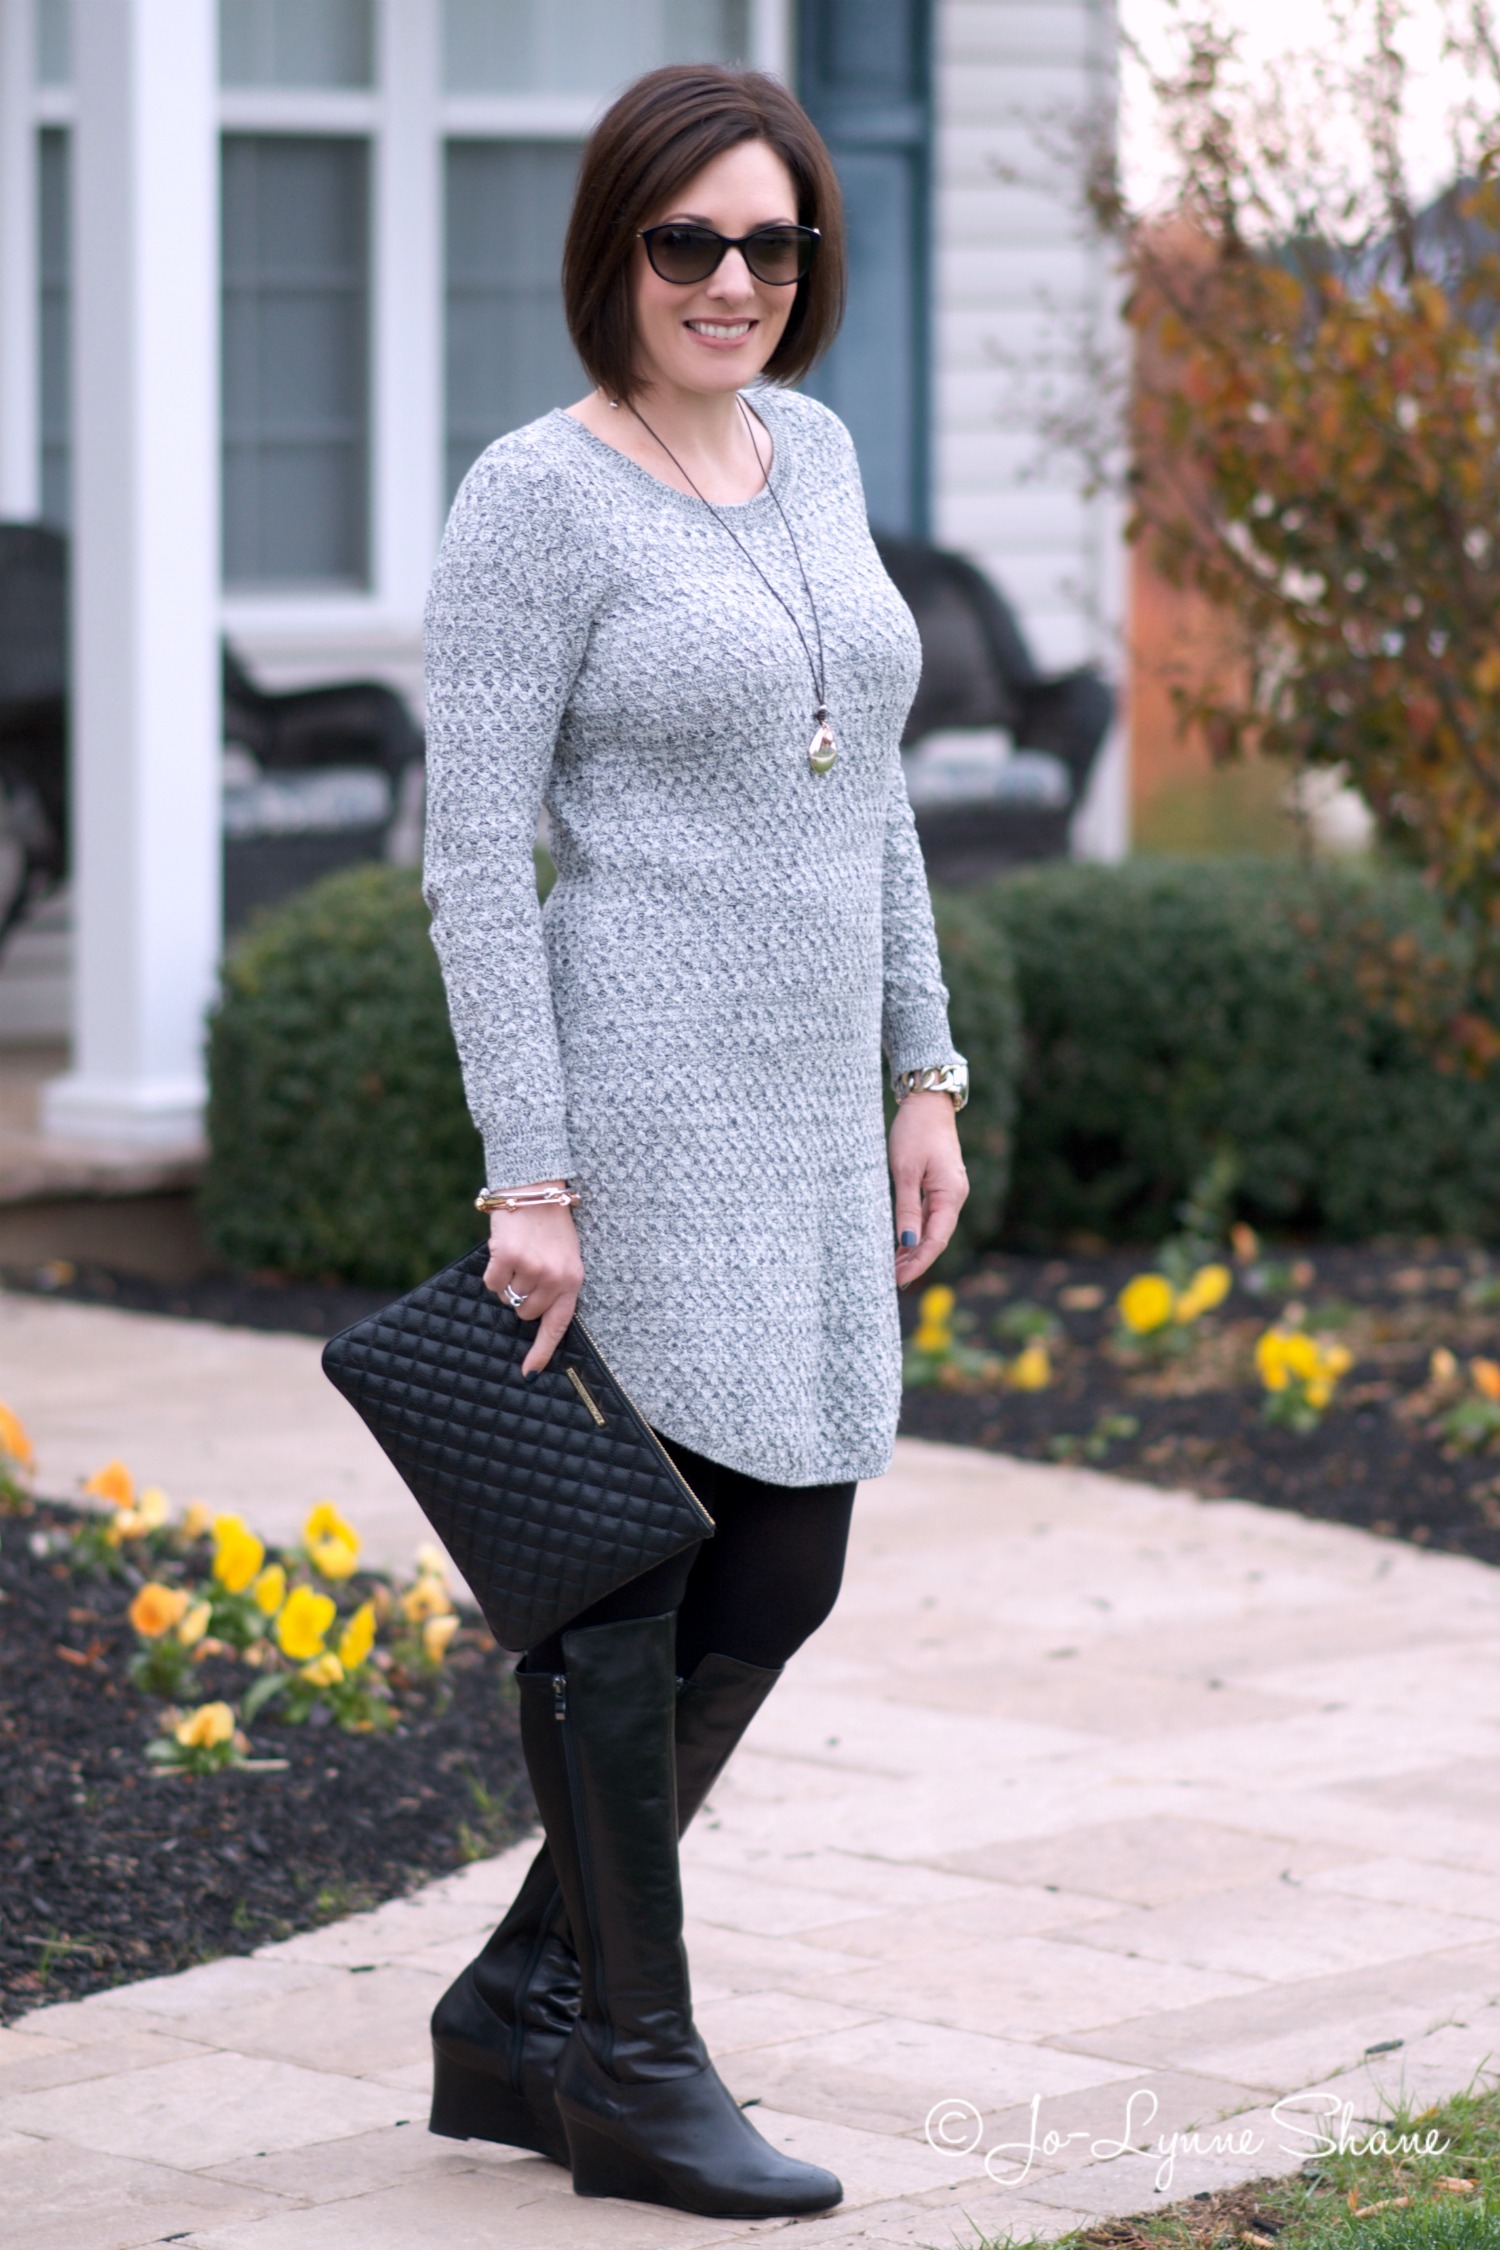 How to Wear a Sweater Dress